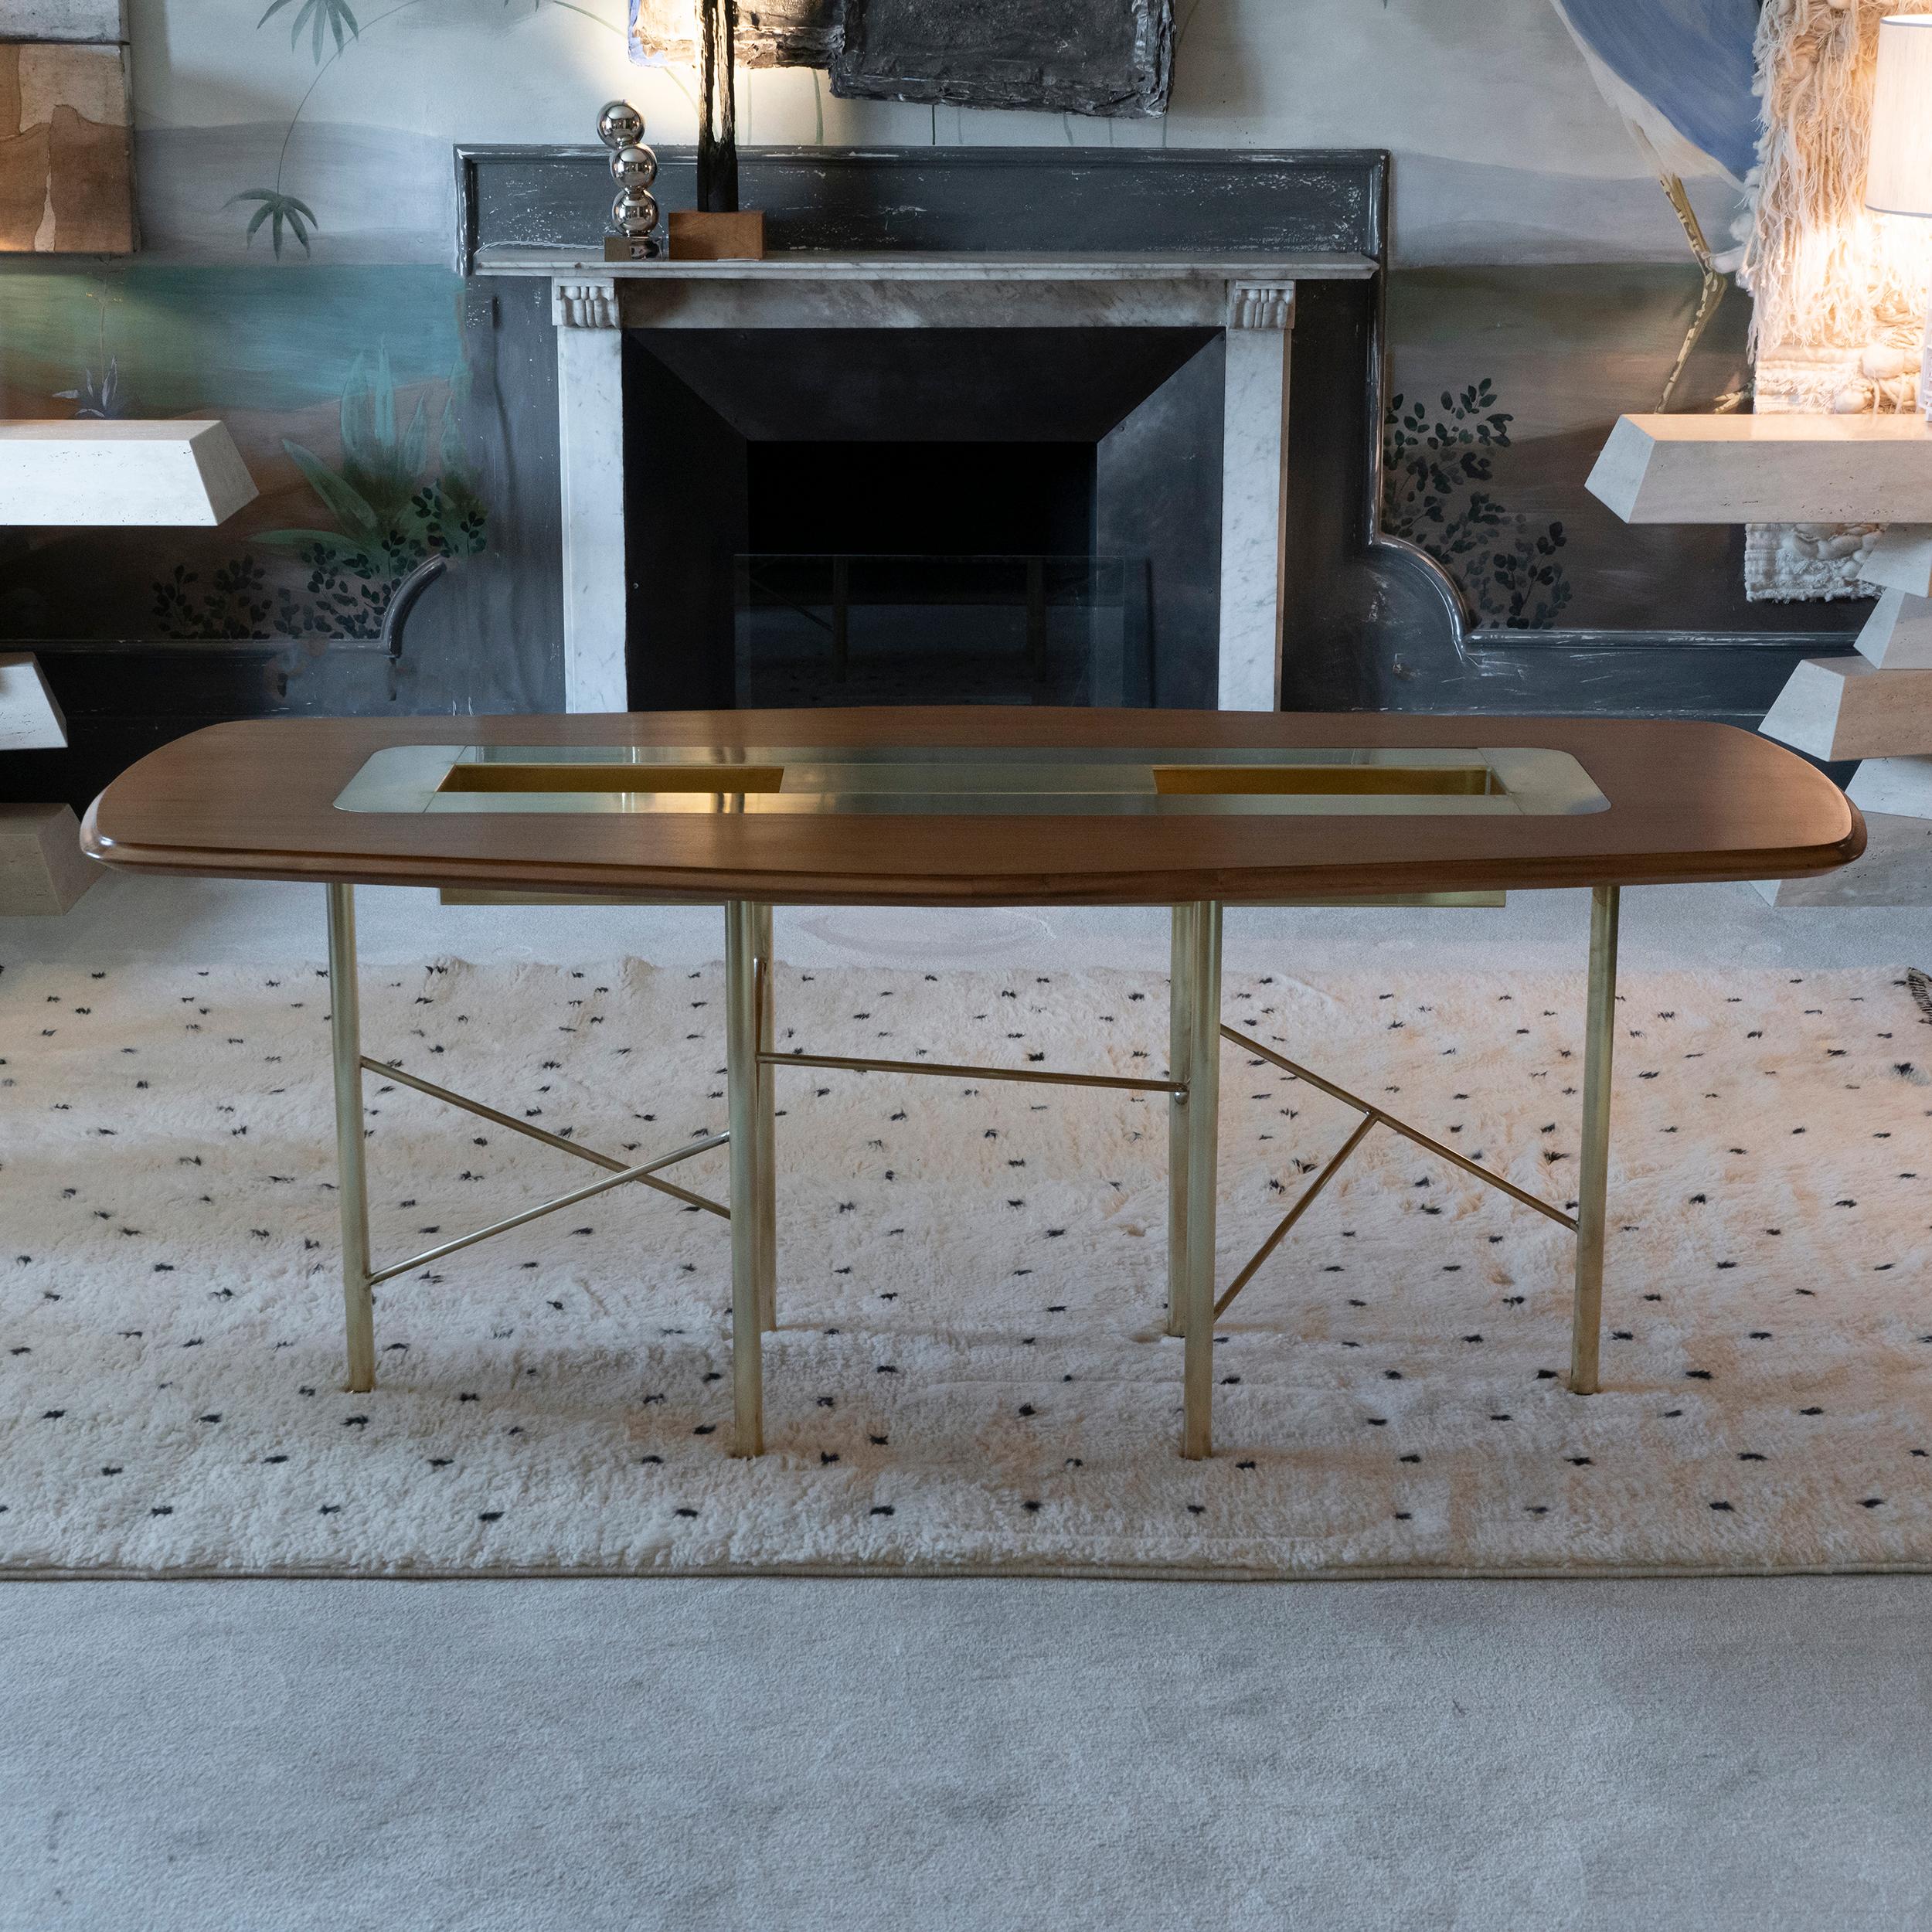 Flair Edition one of a kind table realized with a 1950's vintage top with new central brass container insert with a single sliding element and new brass base, Italy 2022.